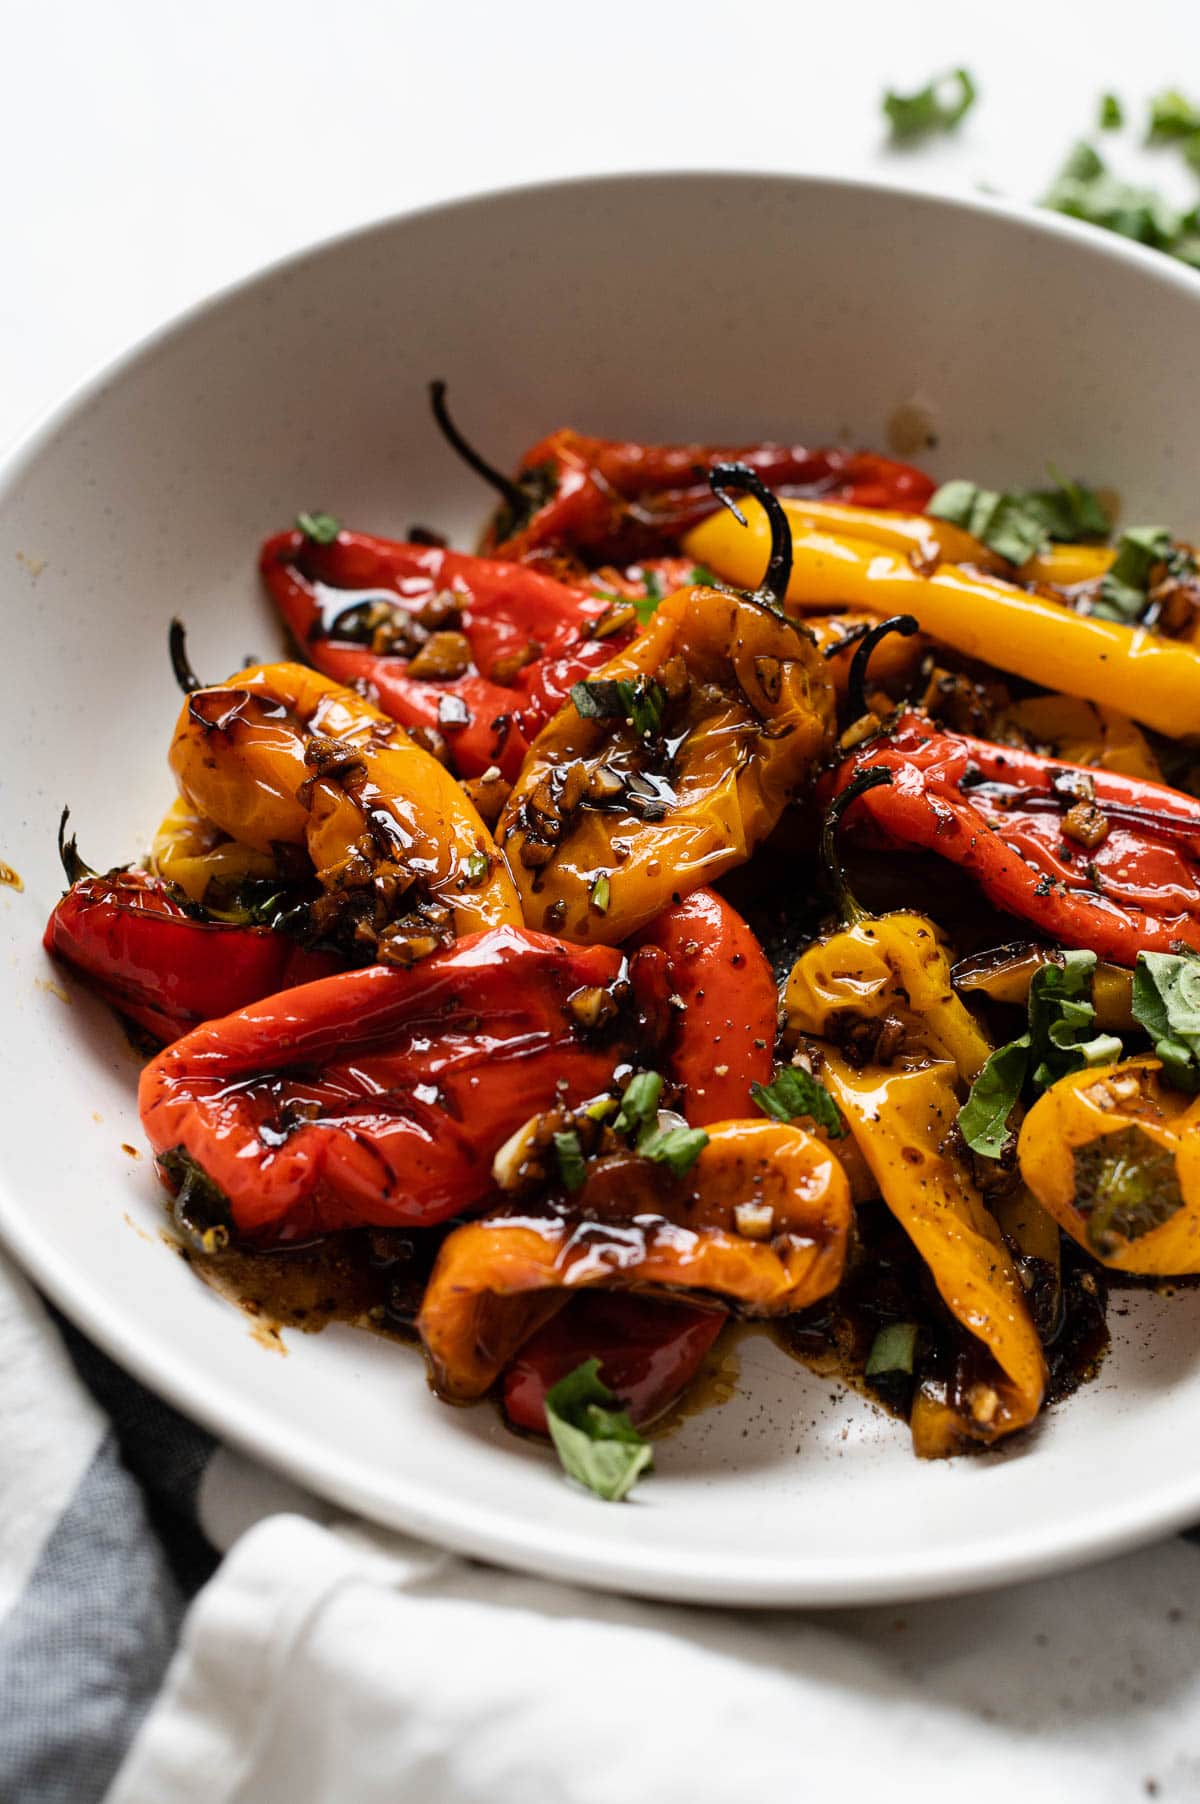 A side view of roasted mini peppers final dish.